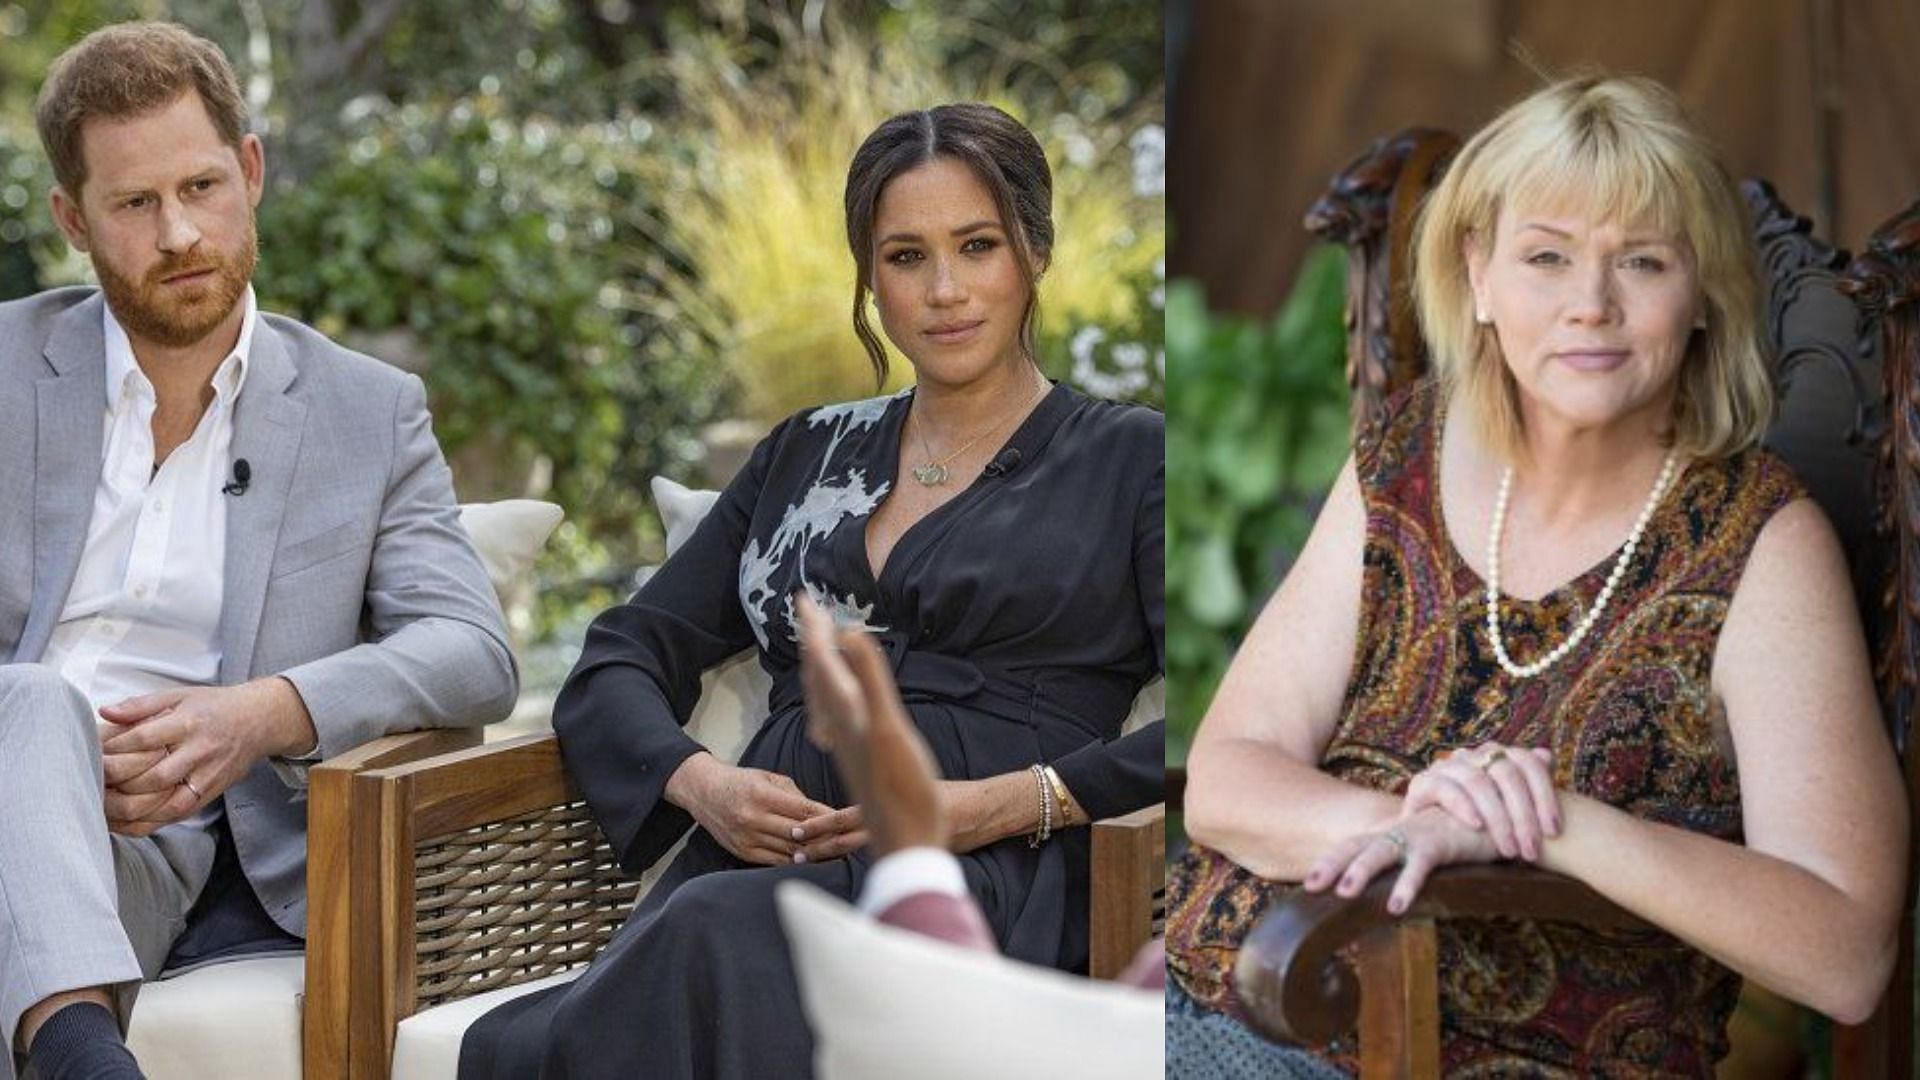 The Duke and Duchess during the sit-down interview, and Samantha Markle (Images via CBS and Splash News)